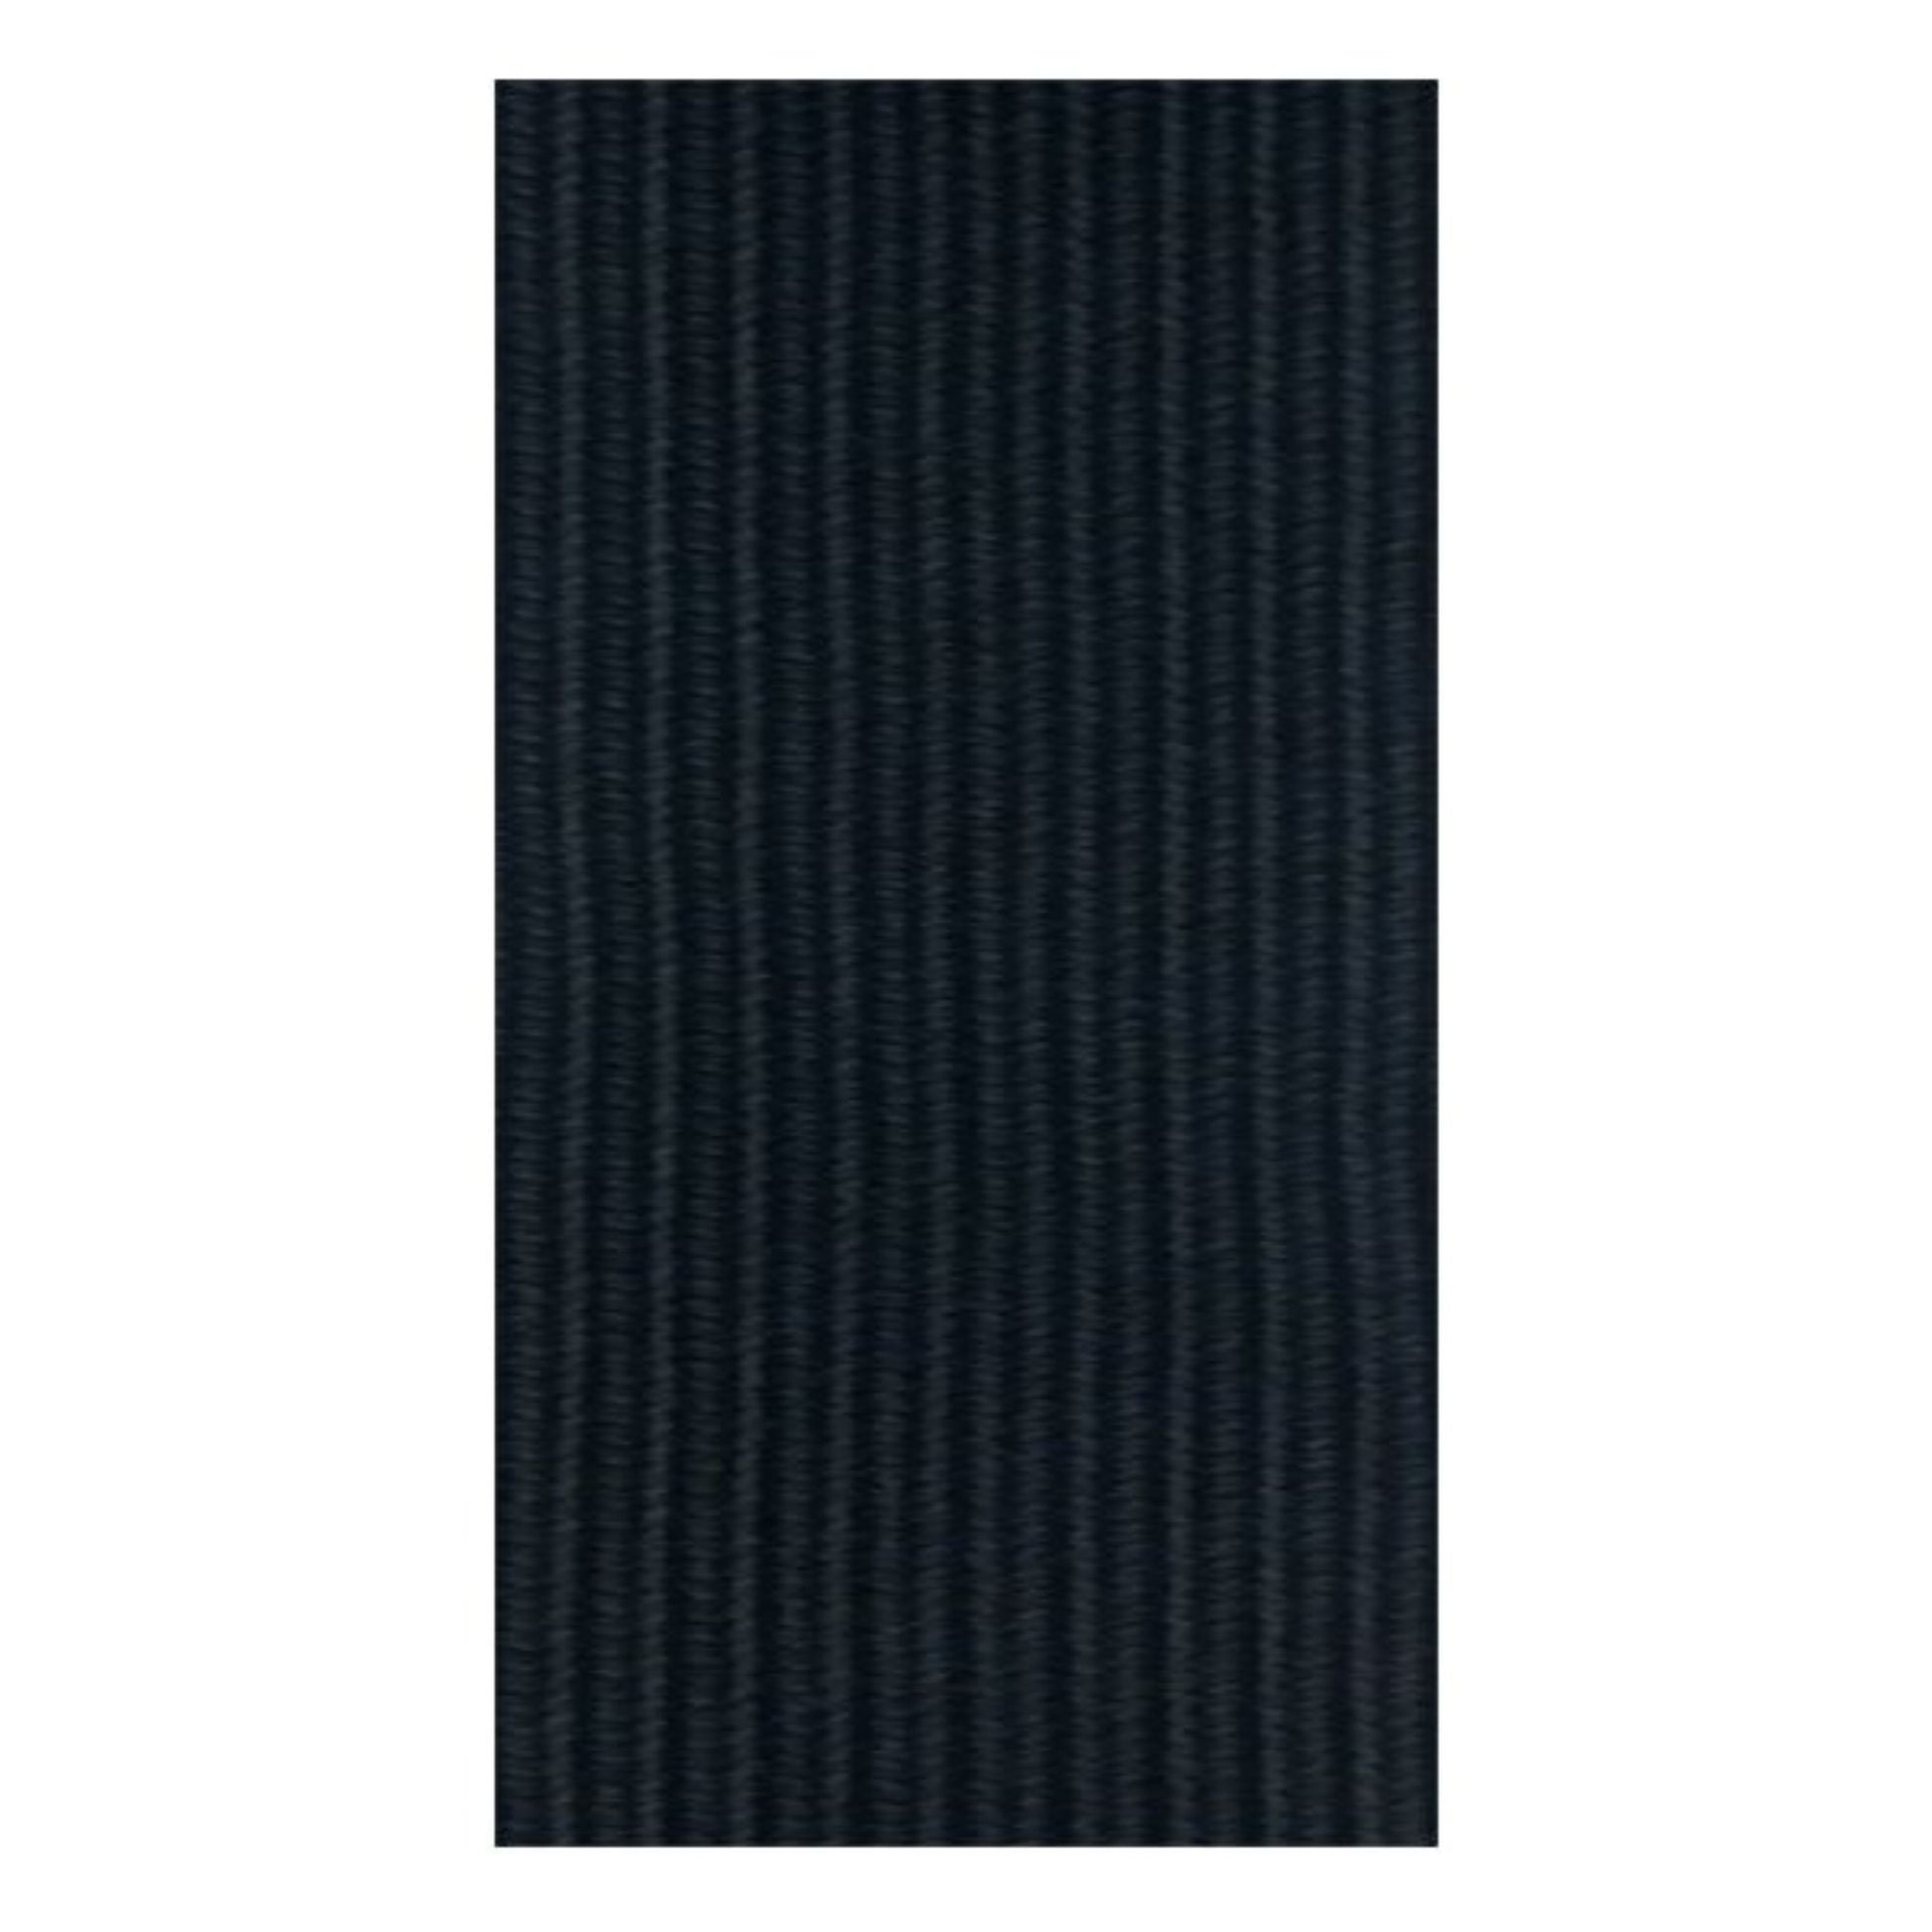 iCraft 1.5-inch Wide Colored Double-Side Twill Woven Elastic,2 Yards,Black 32110